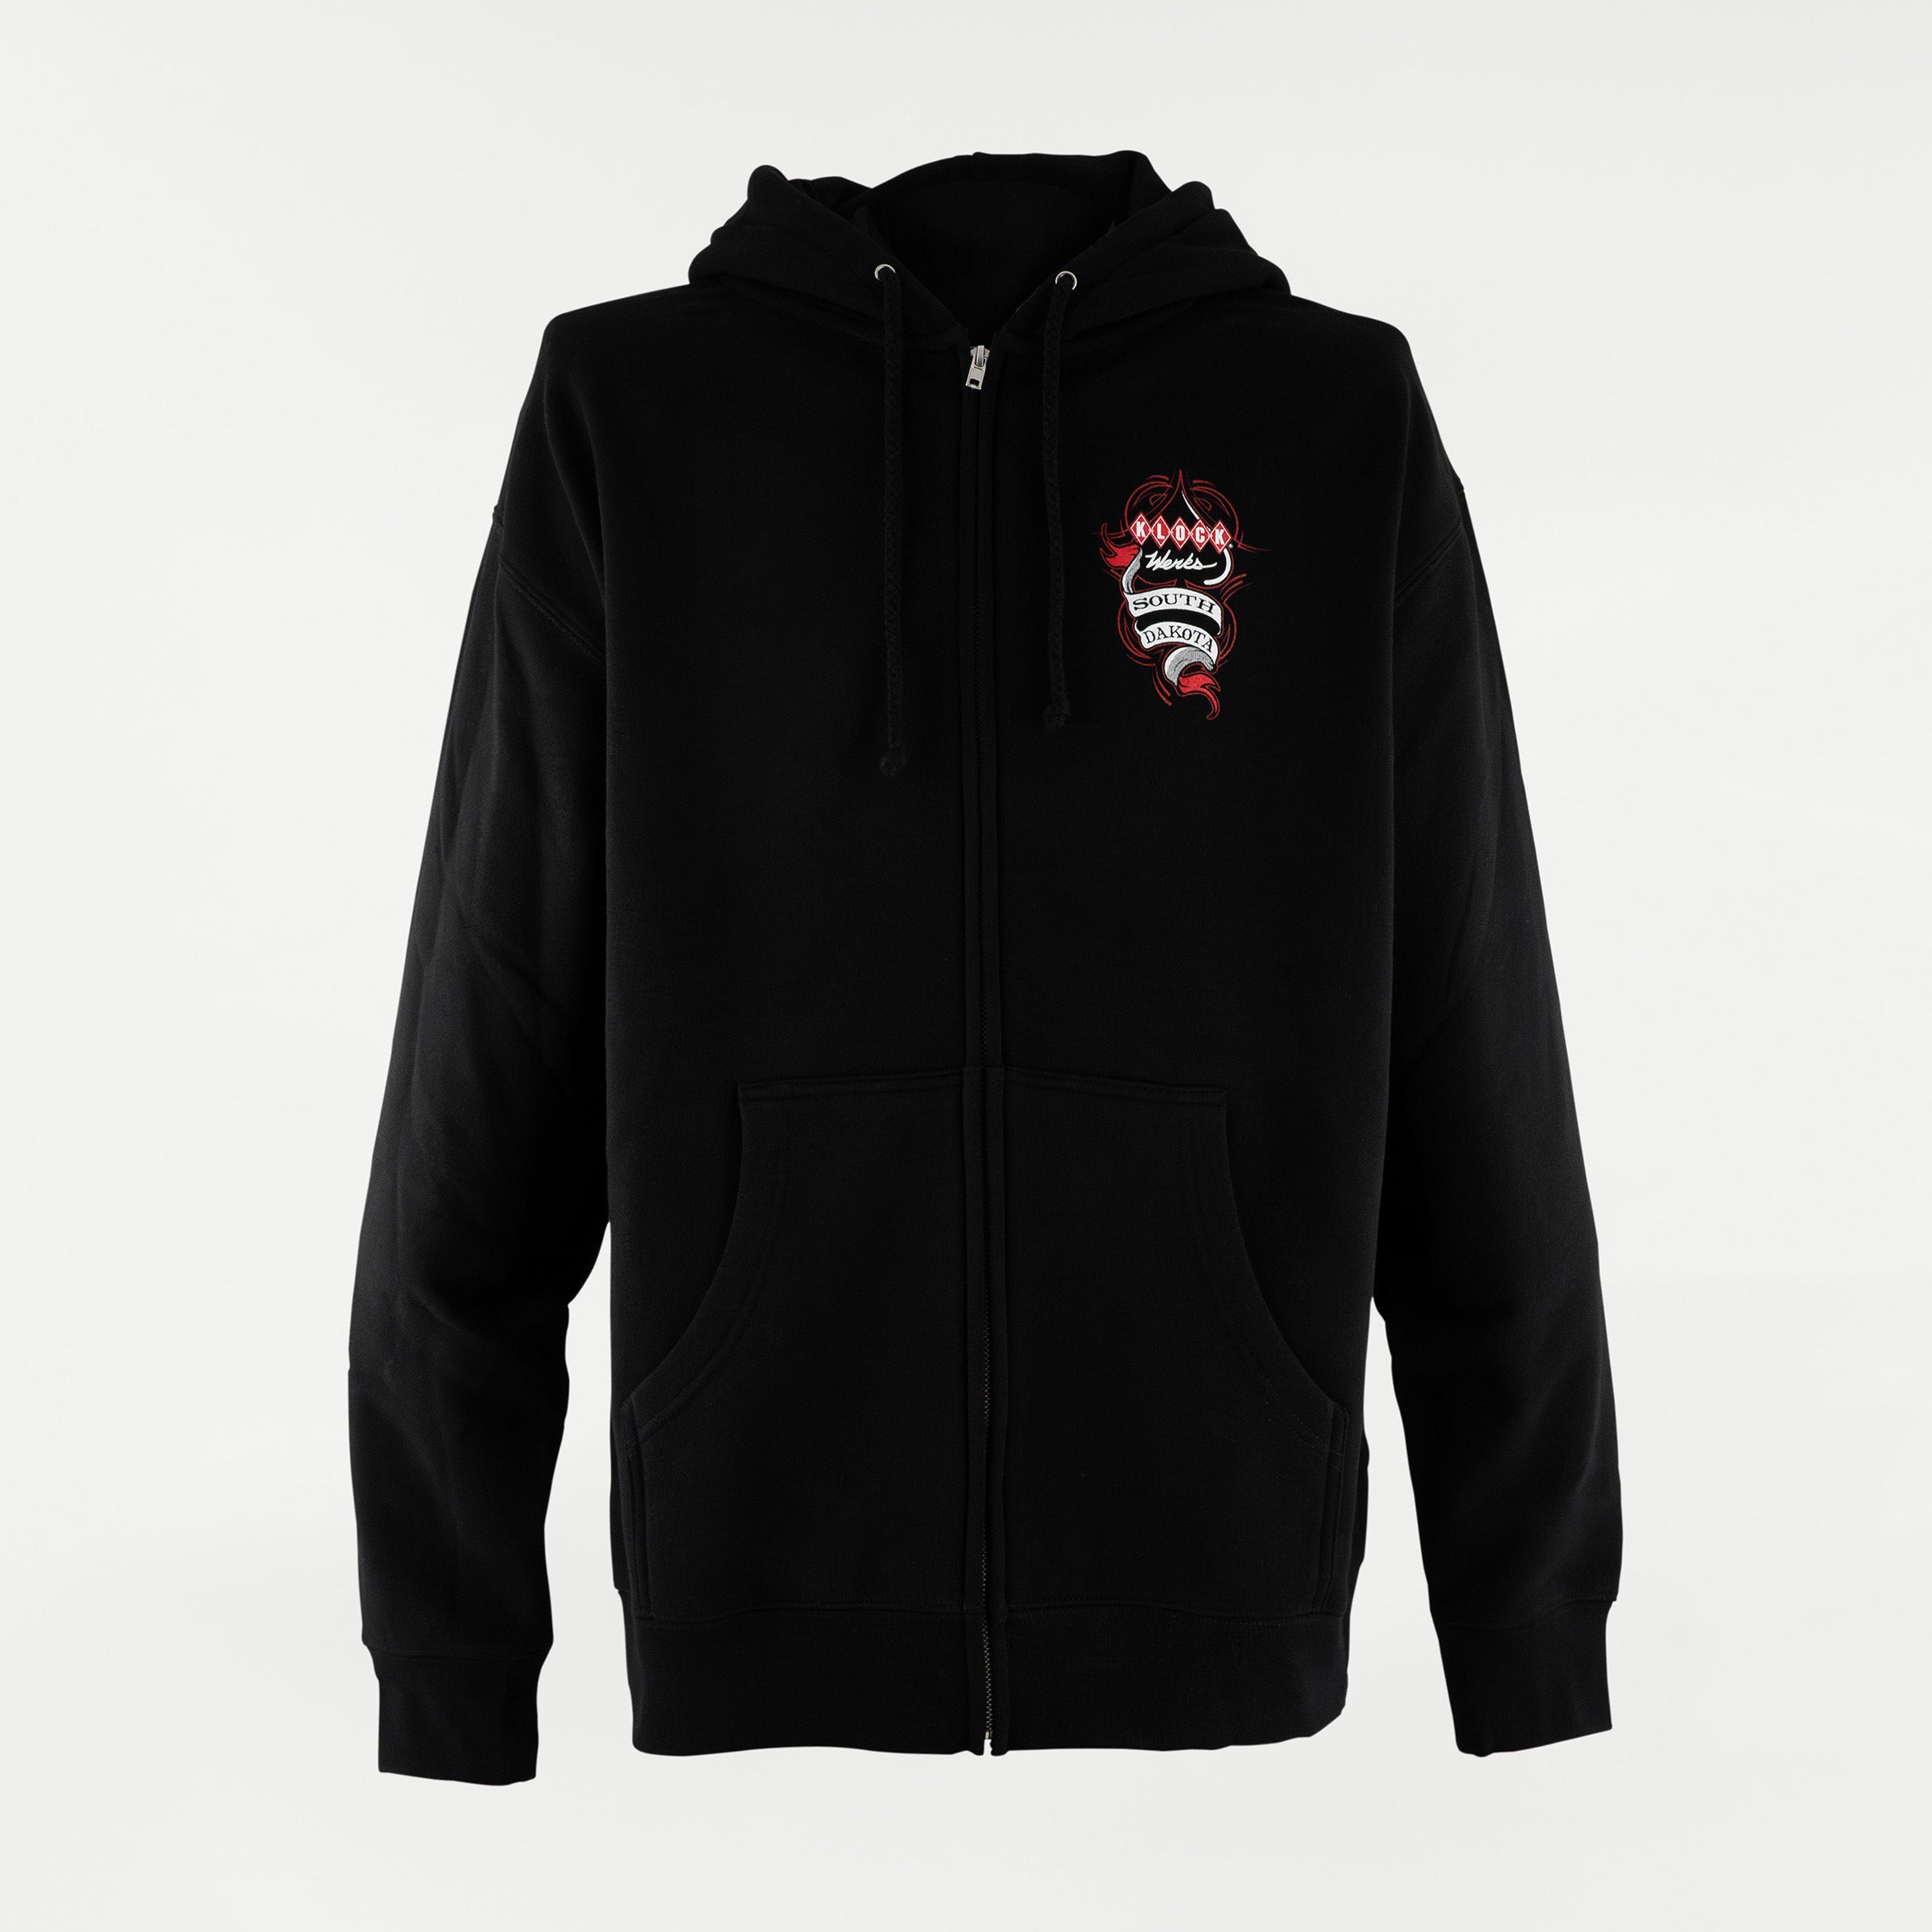 Black Zip-Up Hoodie with Spark Plug Design on Front Chest (Zip-up)